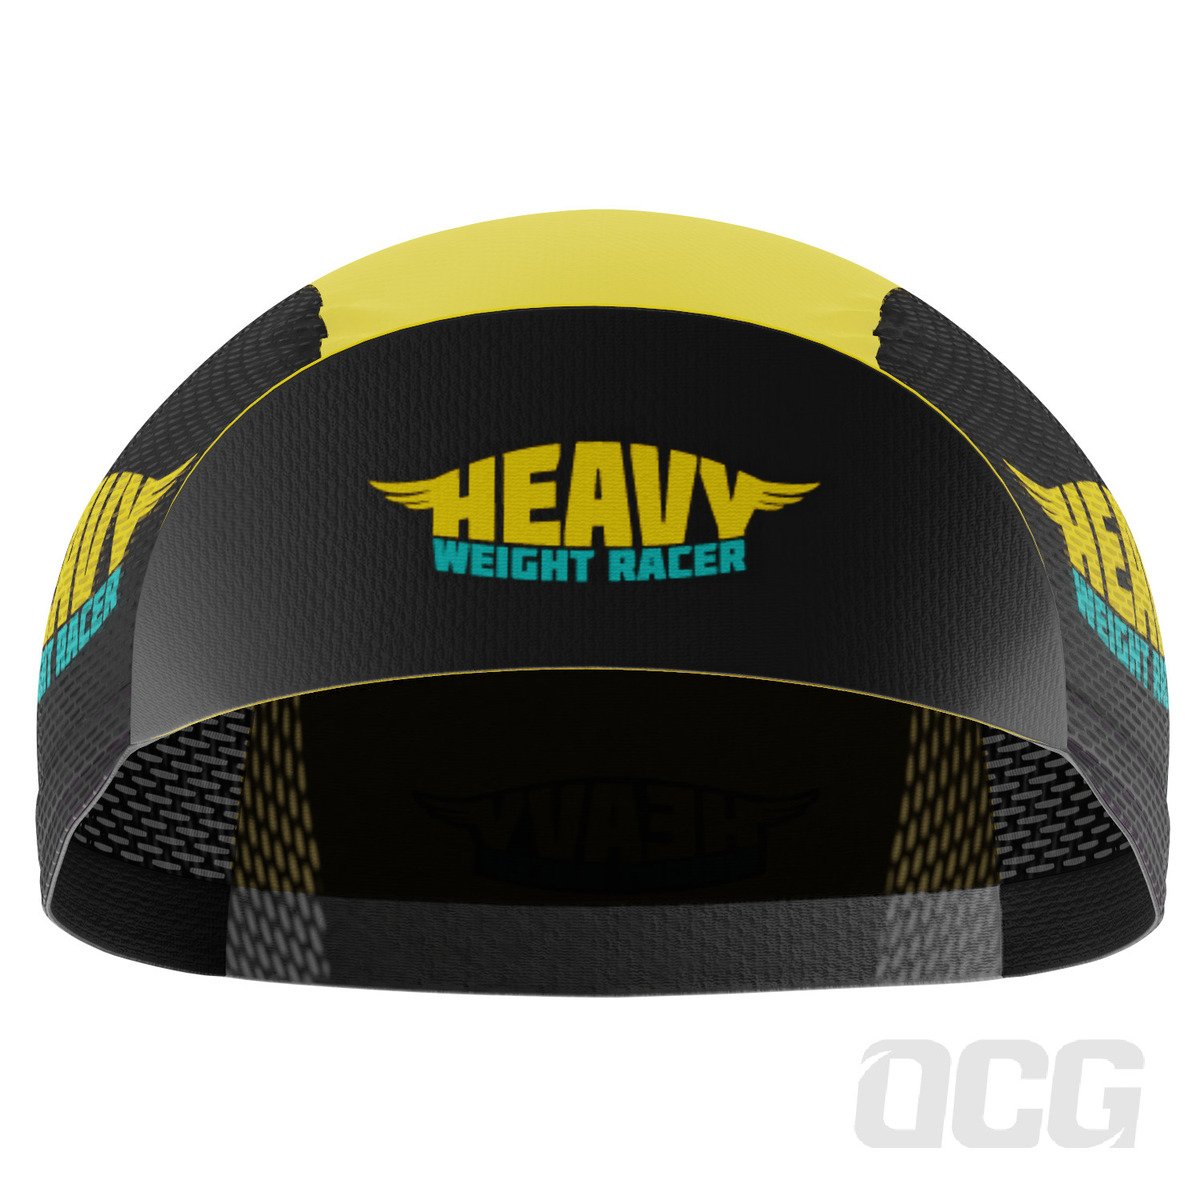 Unisex Heavy Weight Racer Quick-Dry Cycling Cap